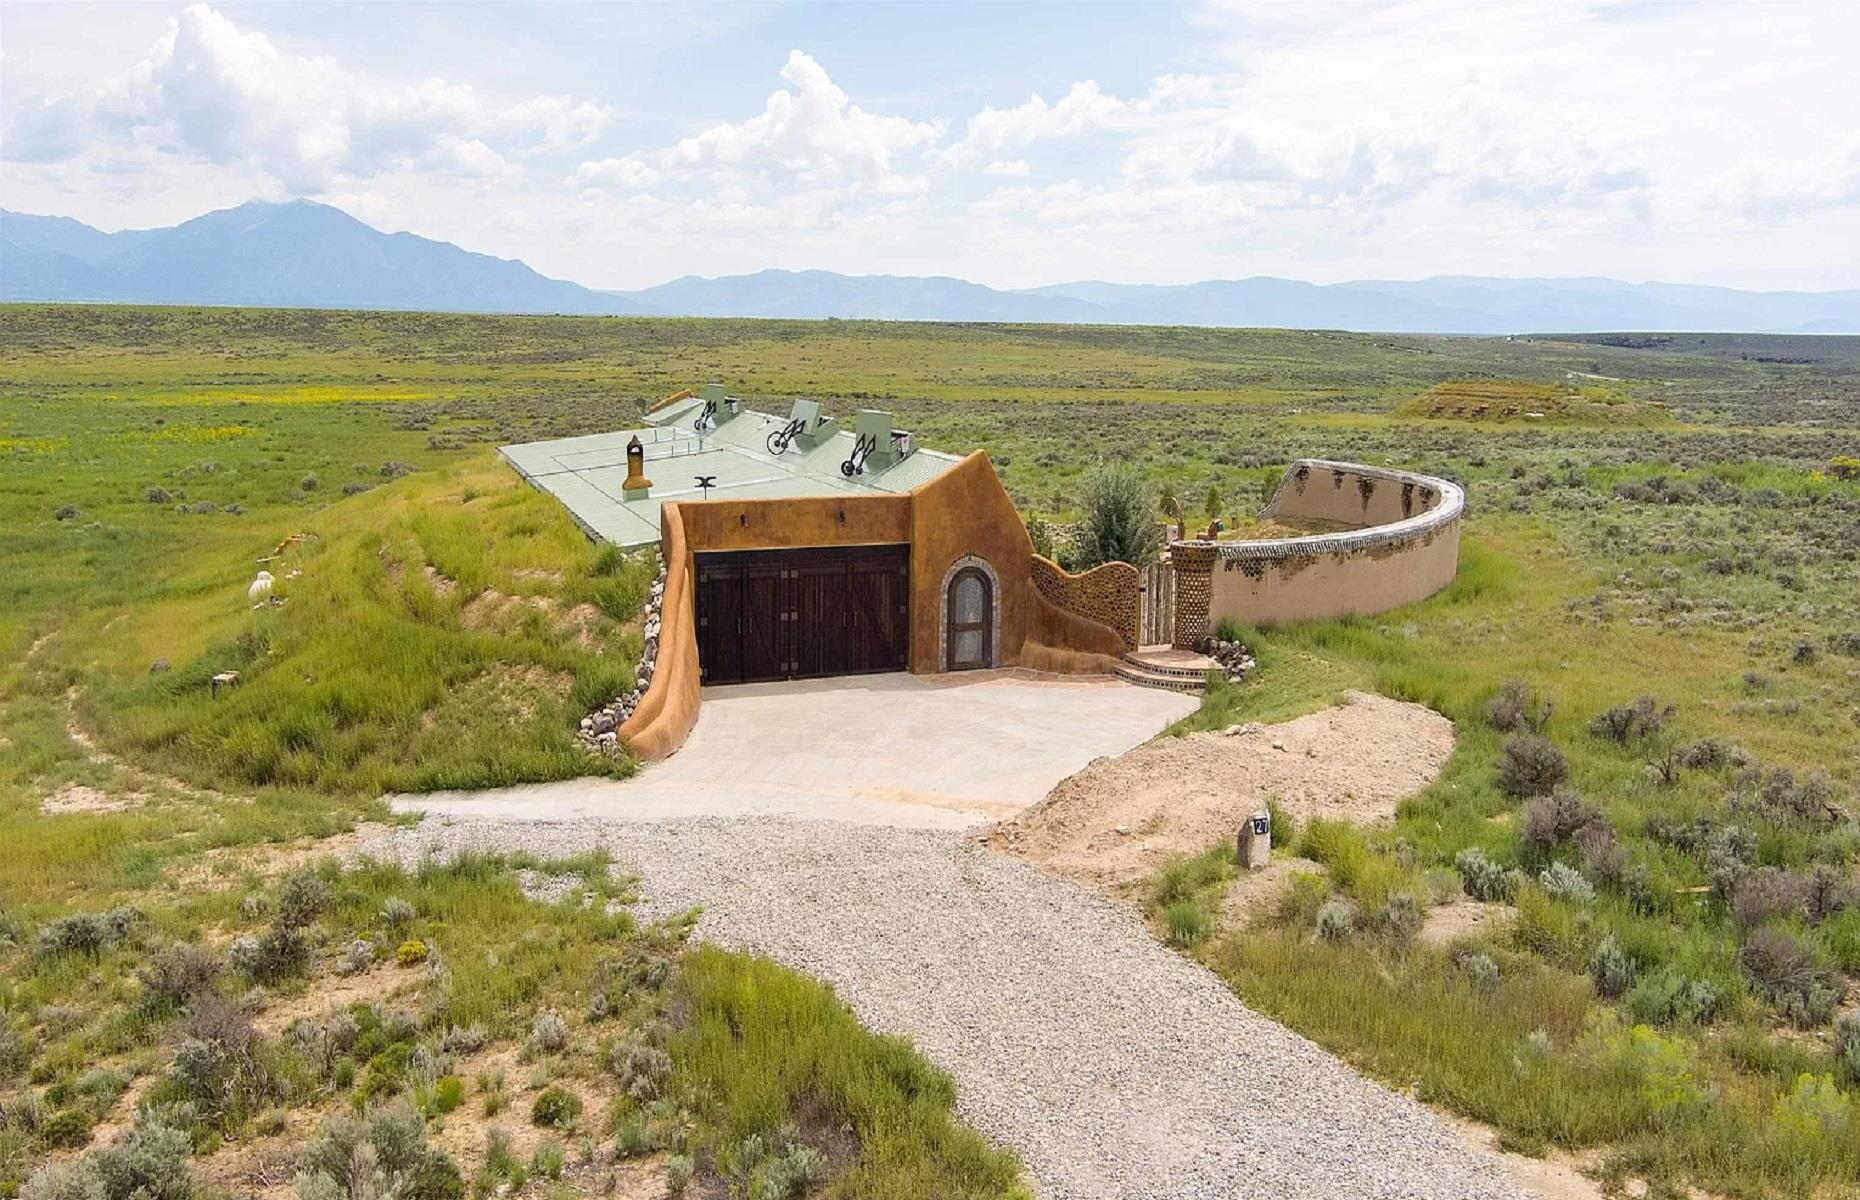 <p>Another option for house-hunters in New Mexico, this stunning Earthship in Tres Piedras is stylish, sleek, and spacious, and it's also a global model that many other Earthships have been based on. It's been featured in magazines like <em>Forbes</em>, and on various TV shows, including Netflix's <em>The World's Most Extraordinary Homes</em>. What's more, it lies inside the Greater World Earthship Community, so you just know you'll be in safe hands. Let's take a closer look...</p>